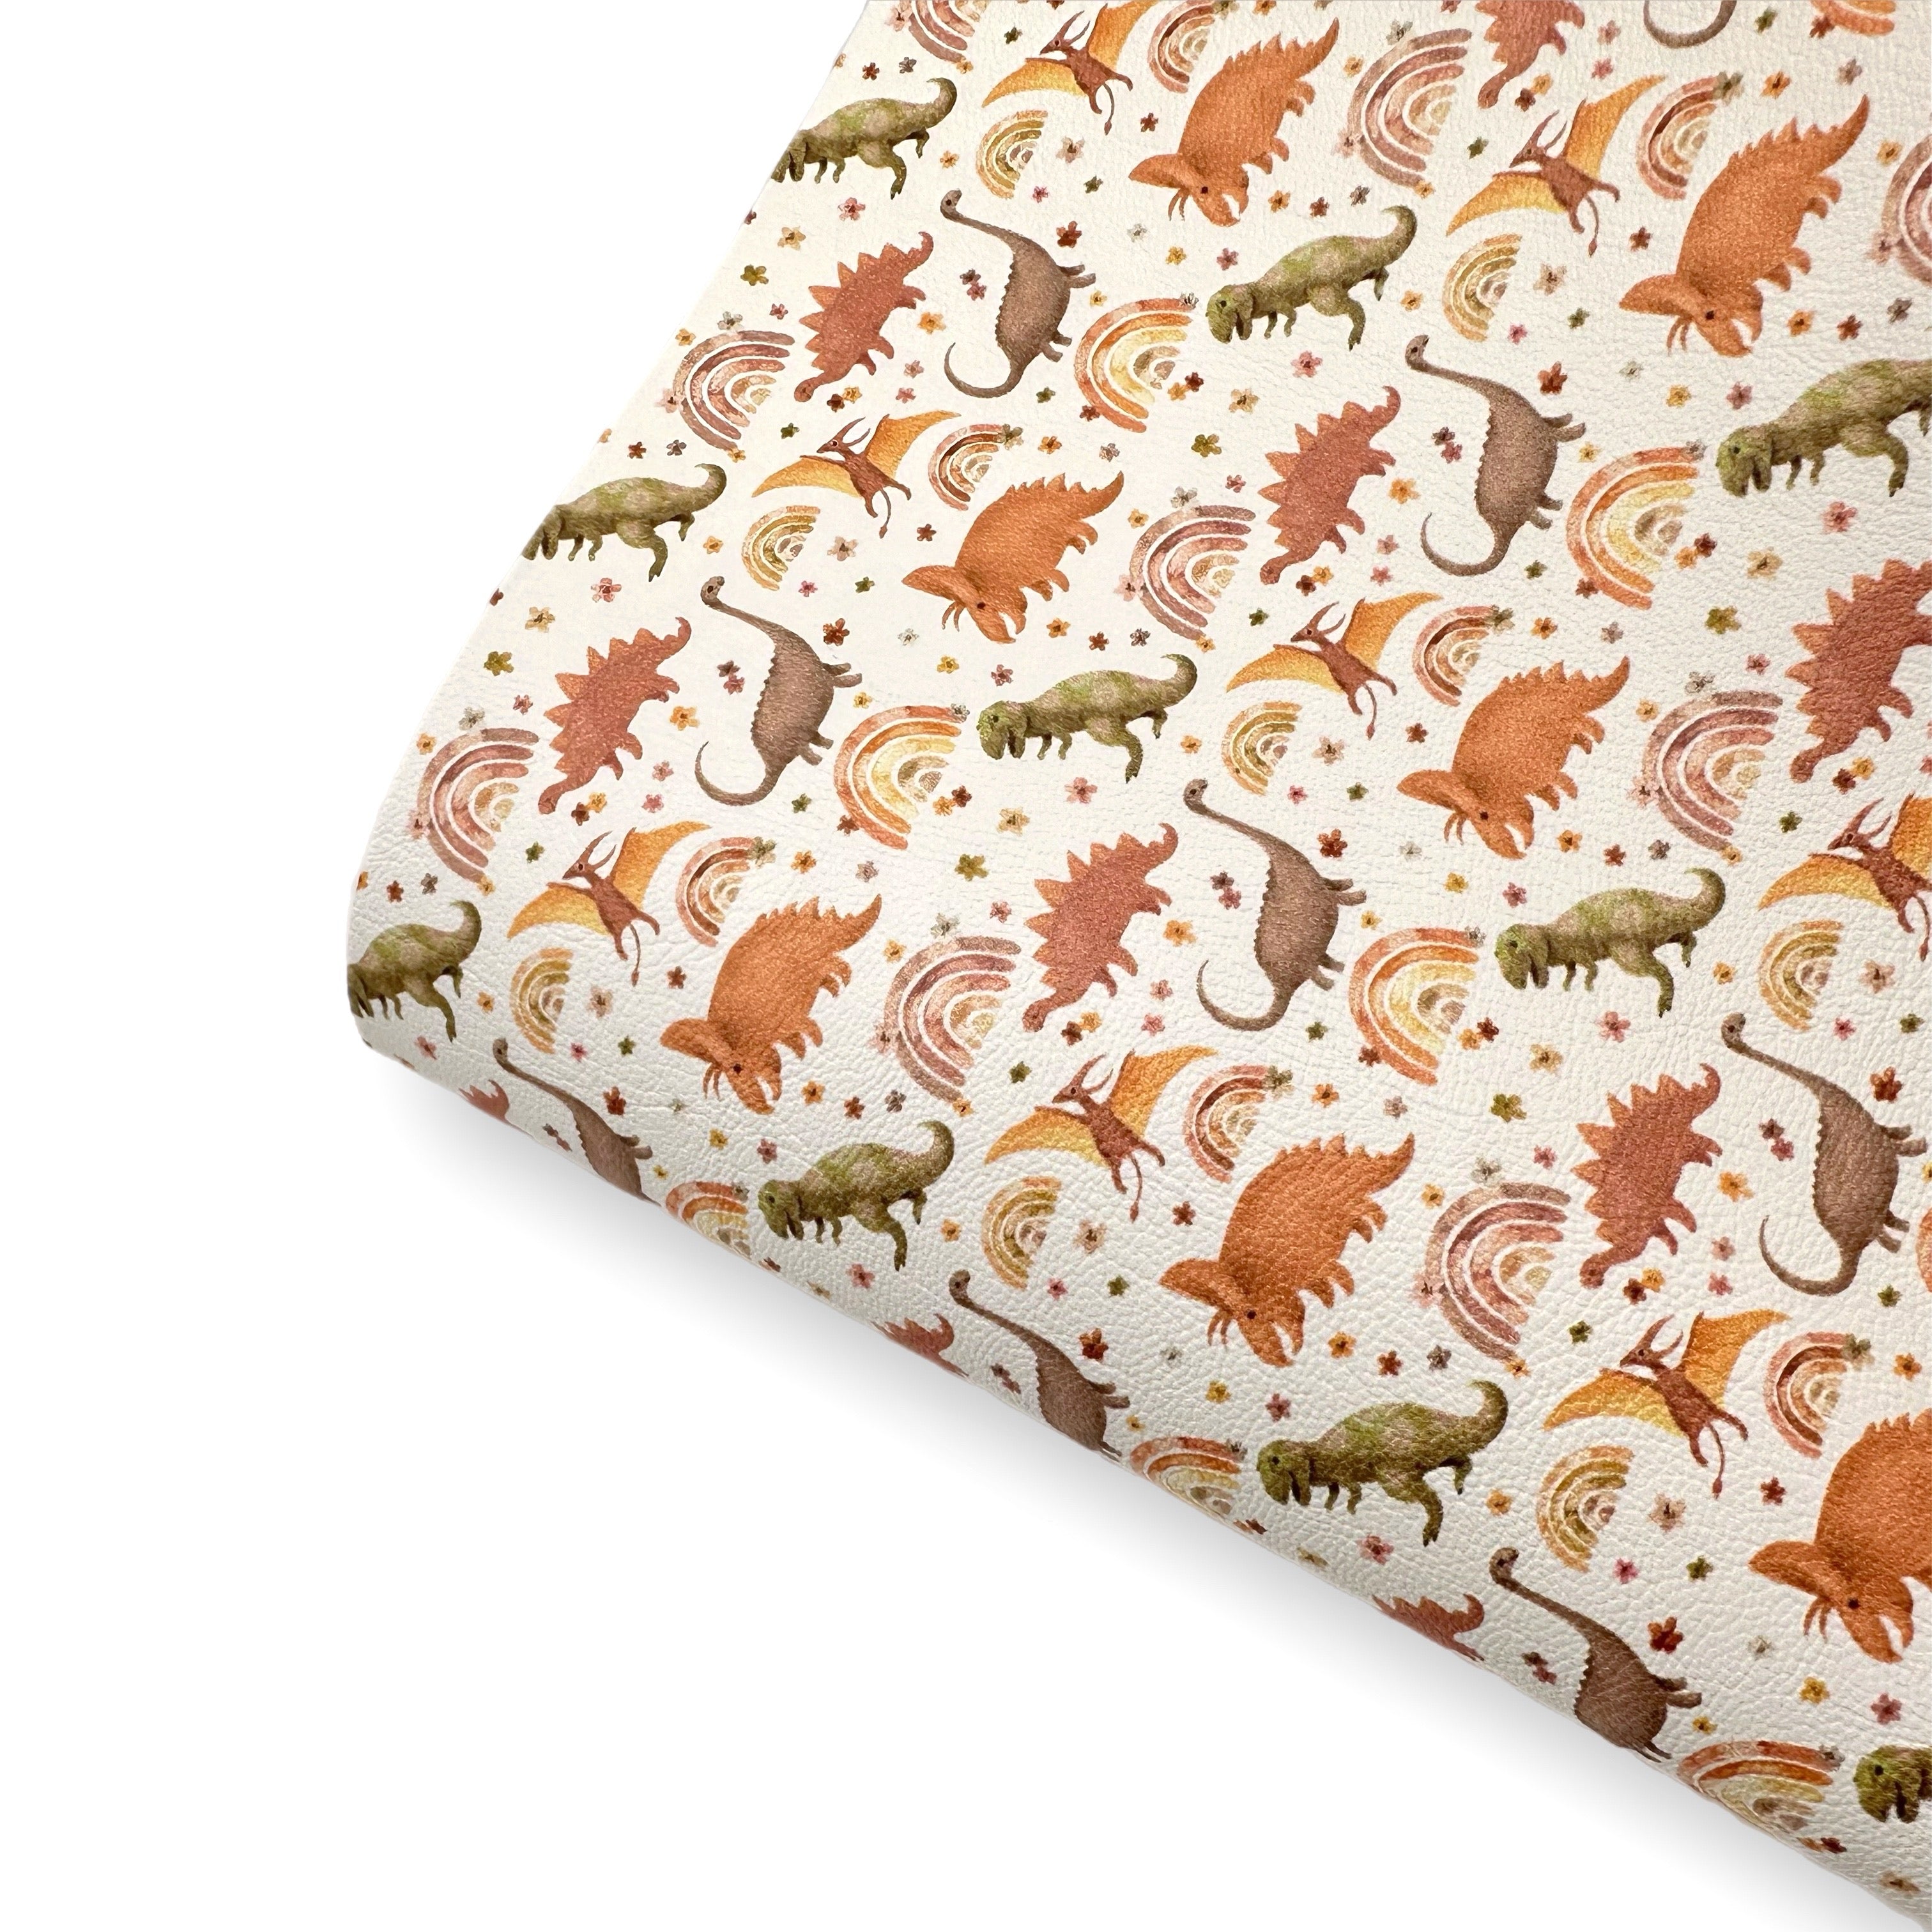 Neutral Dinos Premium Faux Leather Fabric